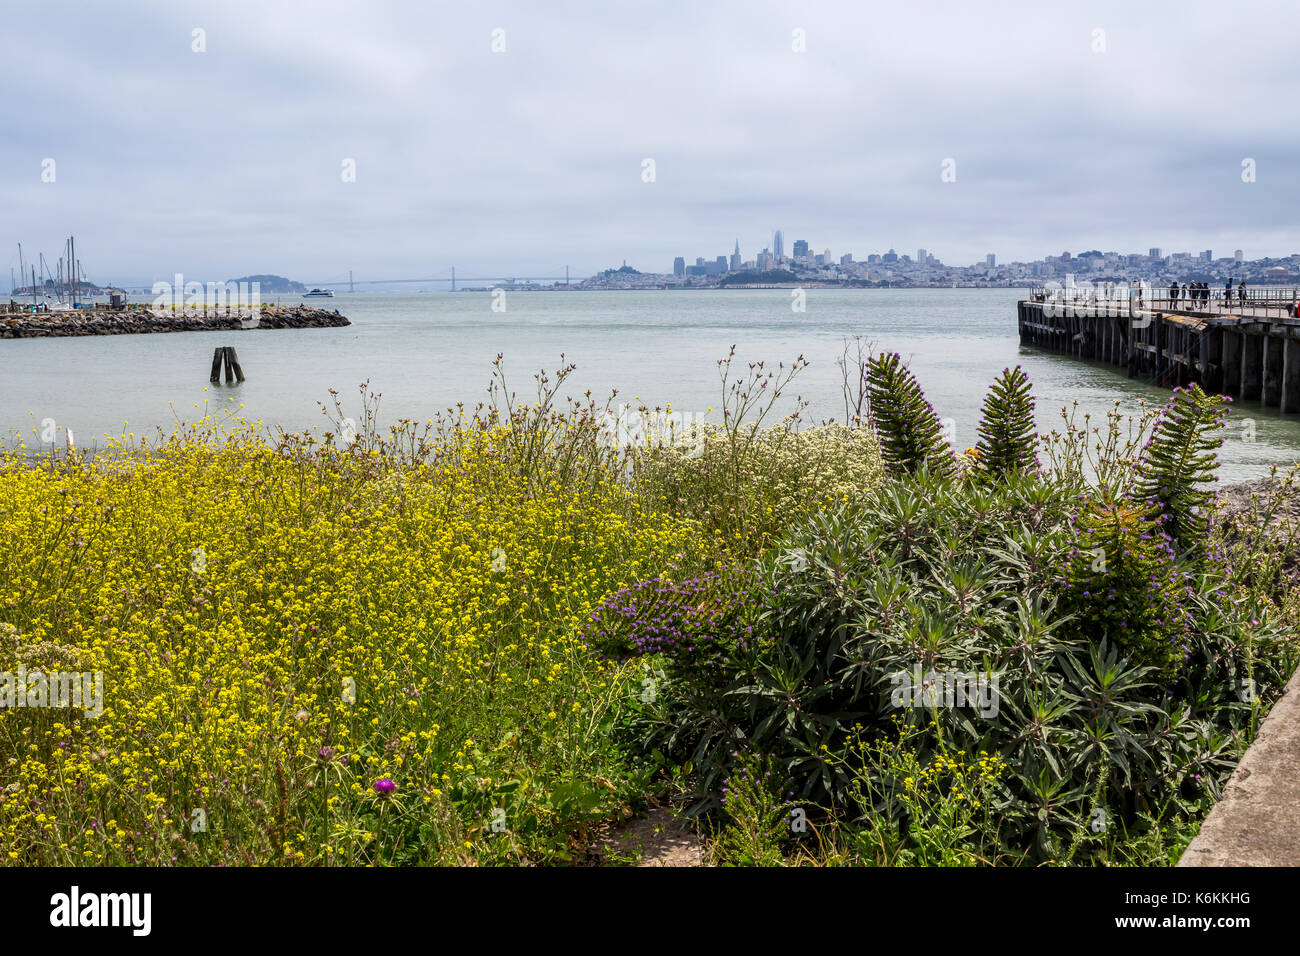 flora, vegetation, people, view toward San Francisco from Fort Baker, Fort Baker, city of Sausalito, Marin County, California, United States Stock Photo